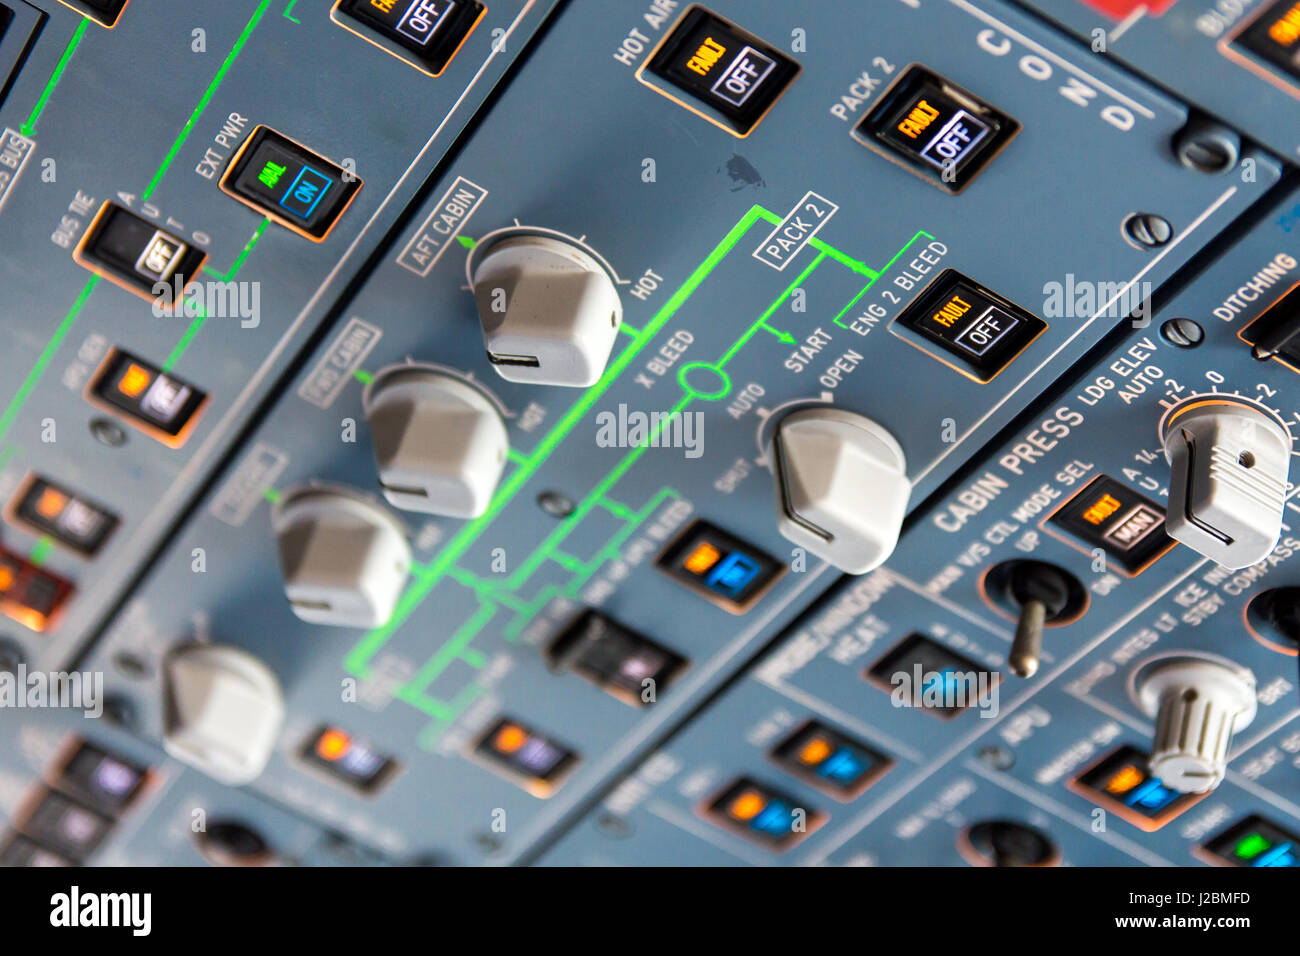 Airbus A320 overhead panel with switches and knobs for controlling various  aircraft systems and components Stock Photo - Alamy